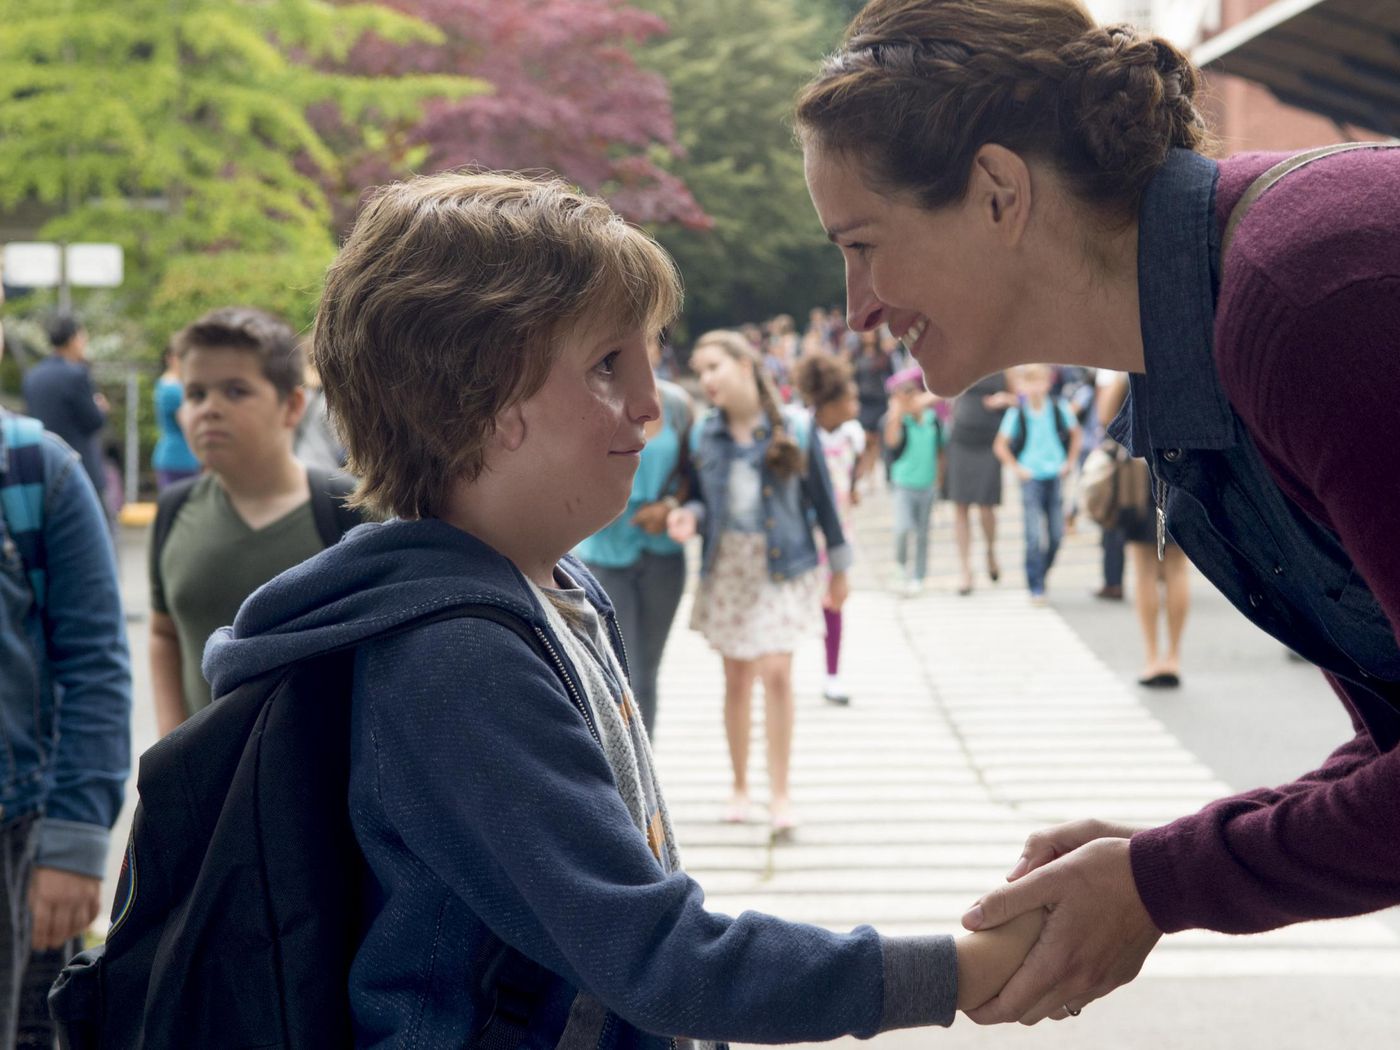 Wonder review: a warm family story that avoids becoming too saccharine